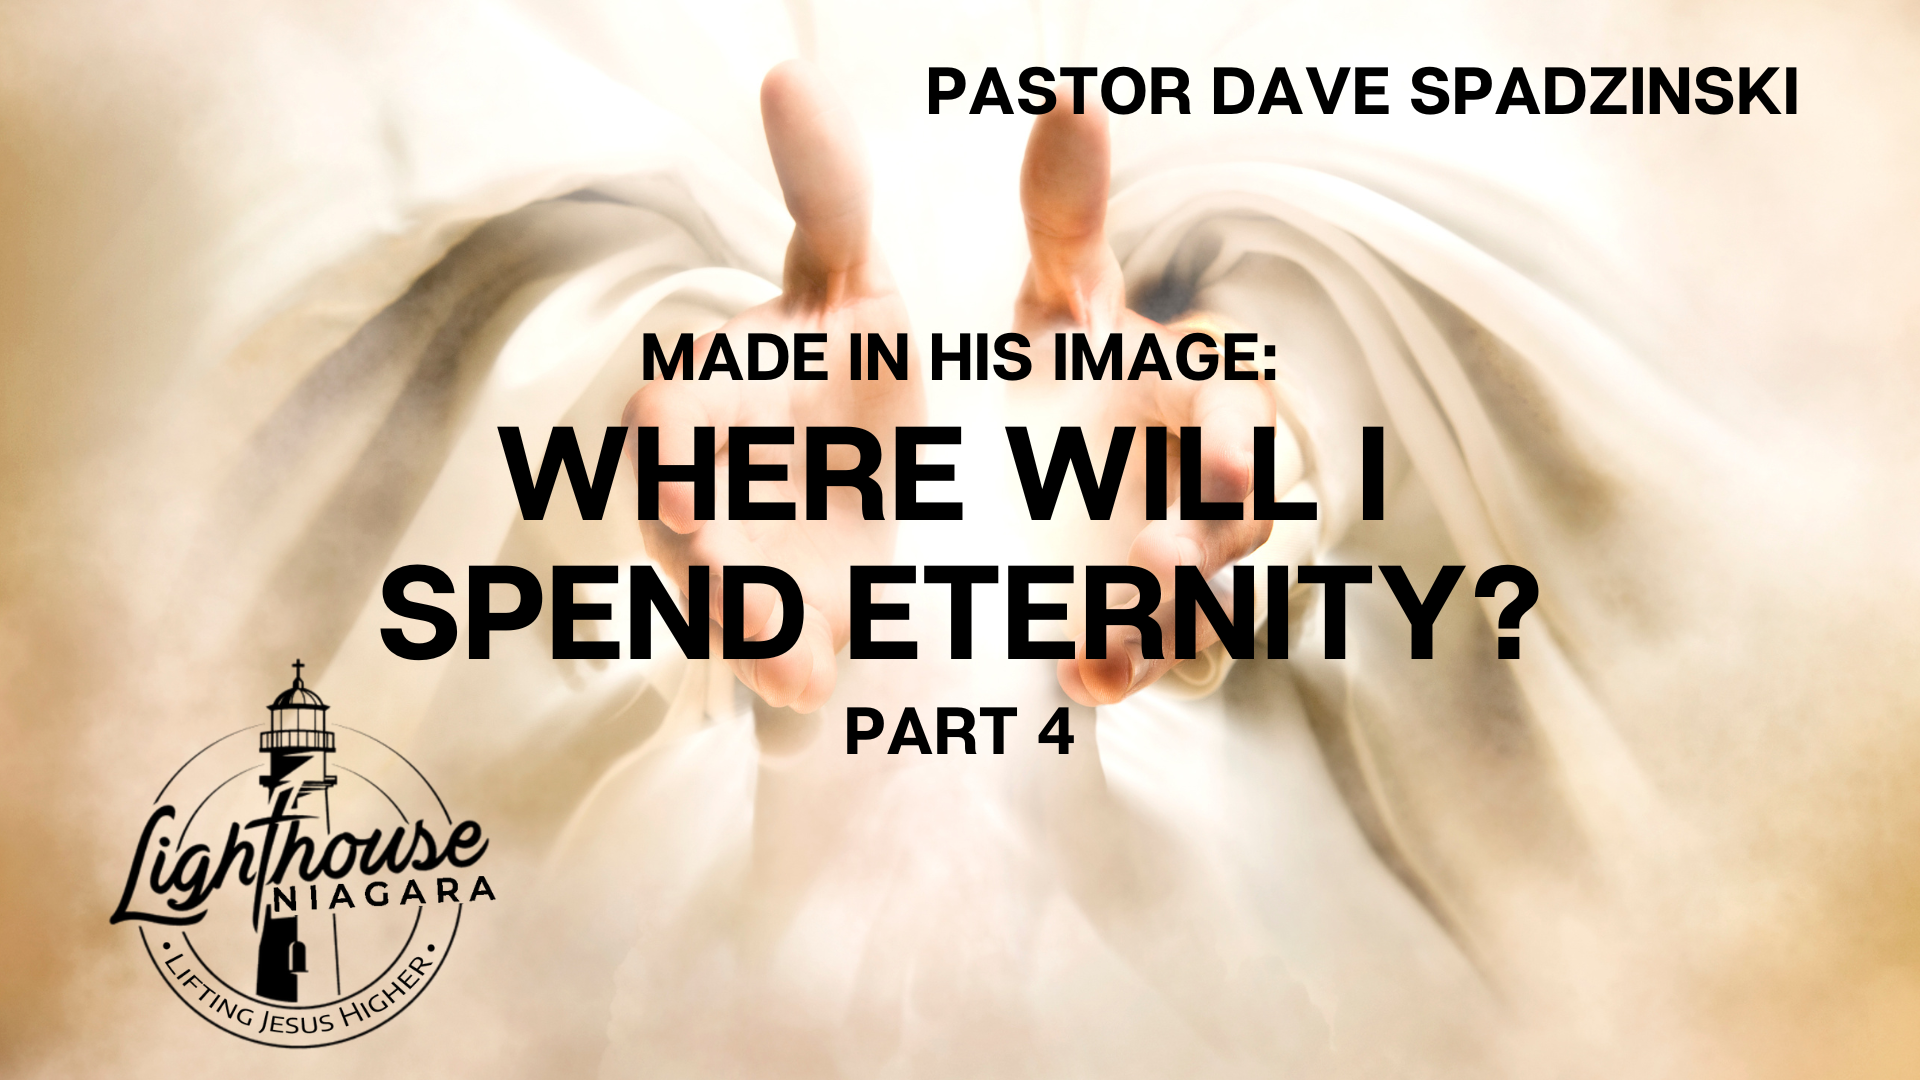 Made In His Image: Where Will I Spend Eternity? - Pastor Dave Spadzinski